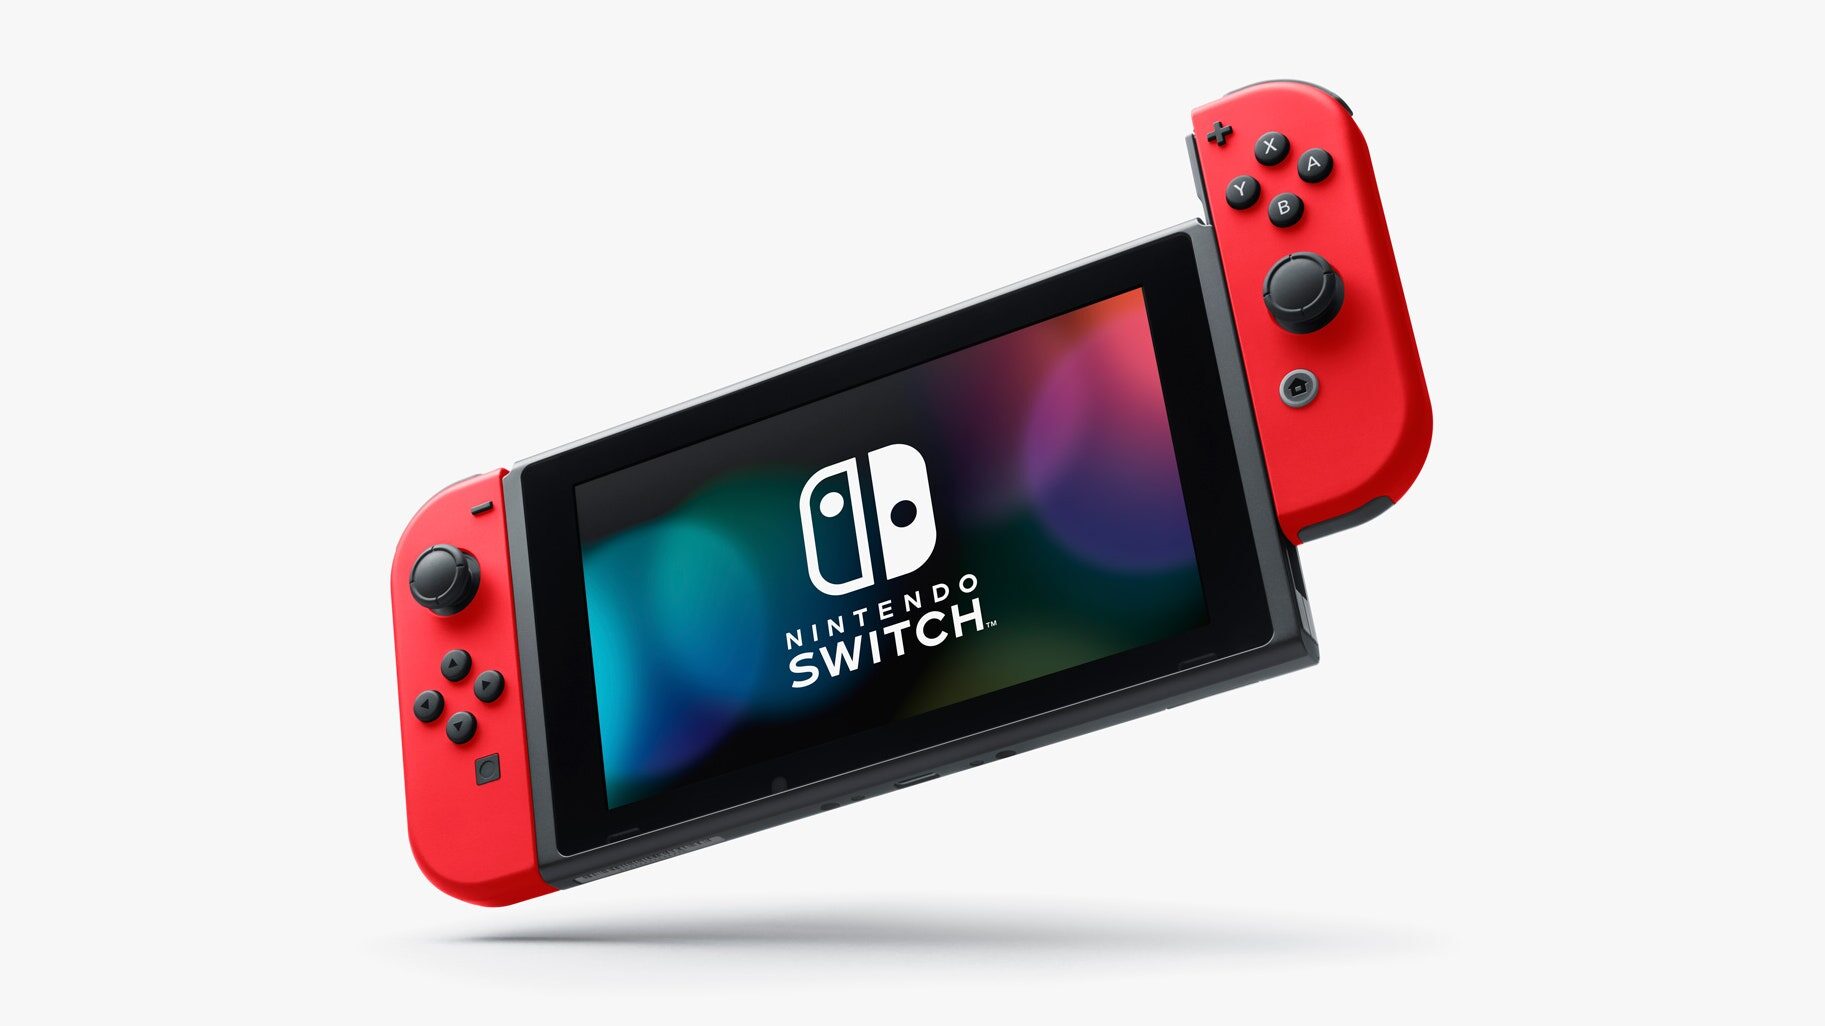 After being sold out, the NYXI wizard Joy-Con is now available for